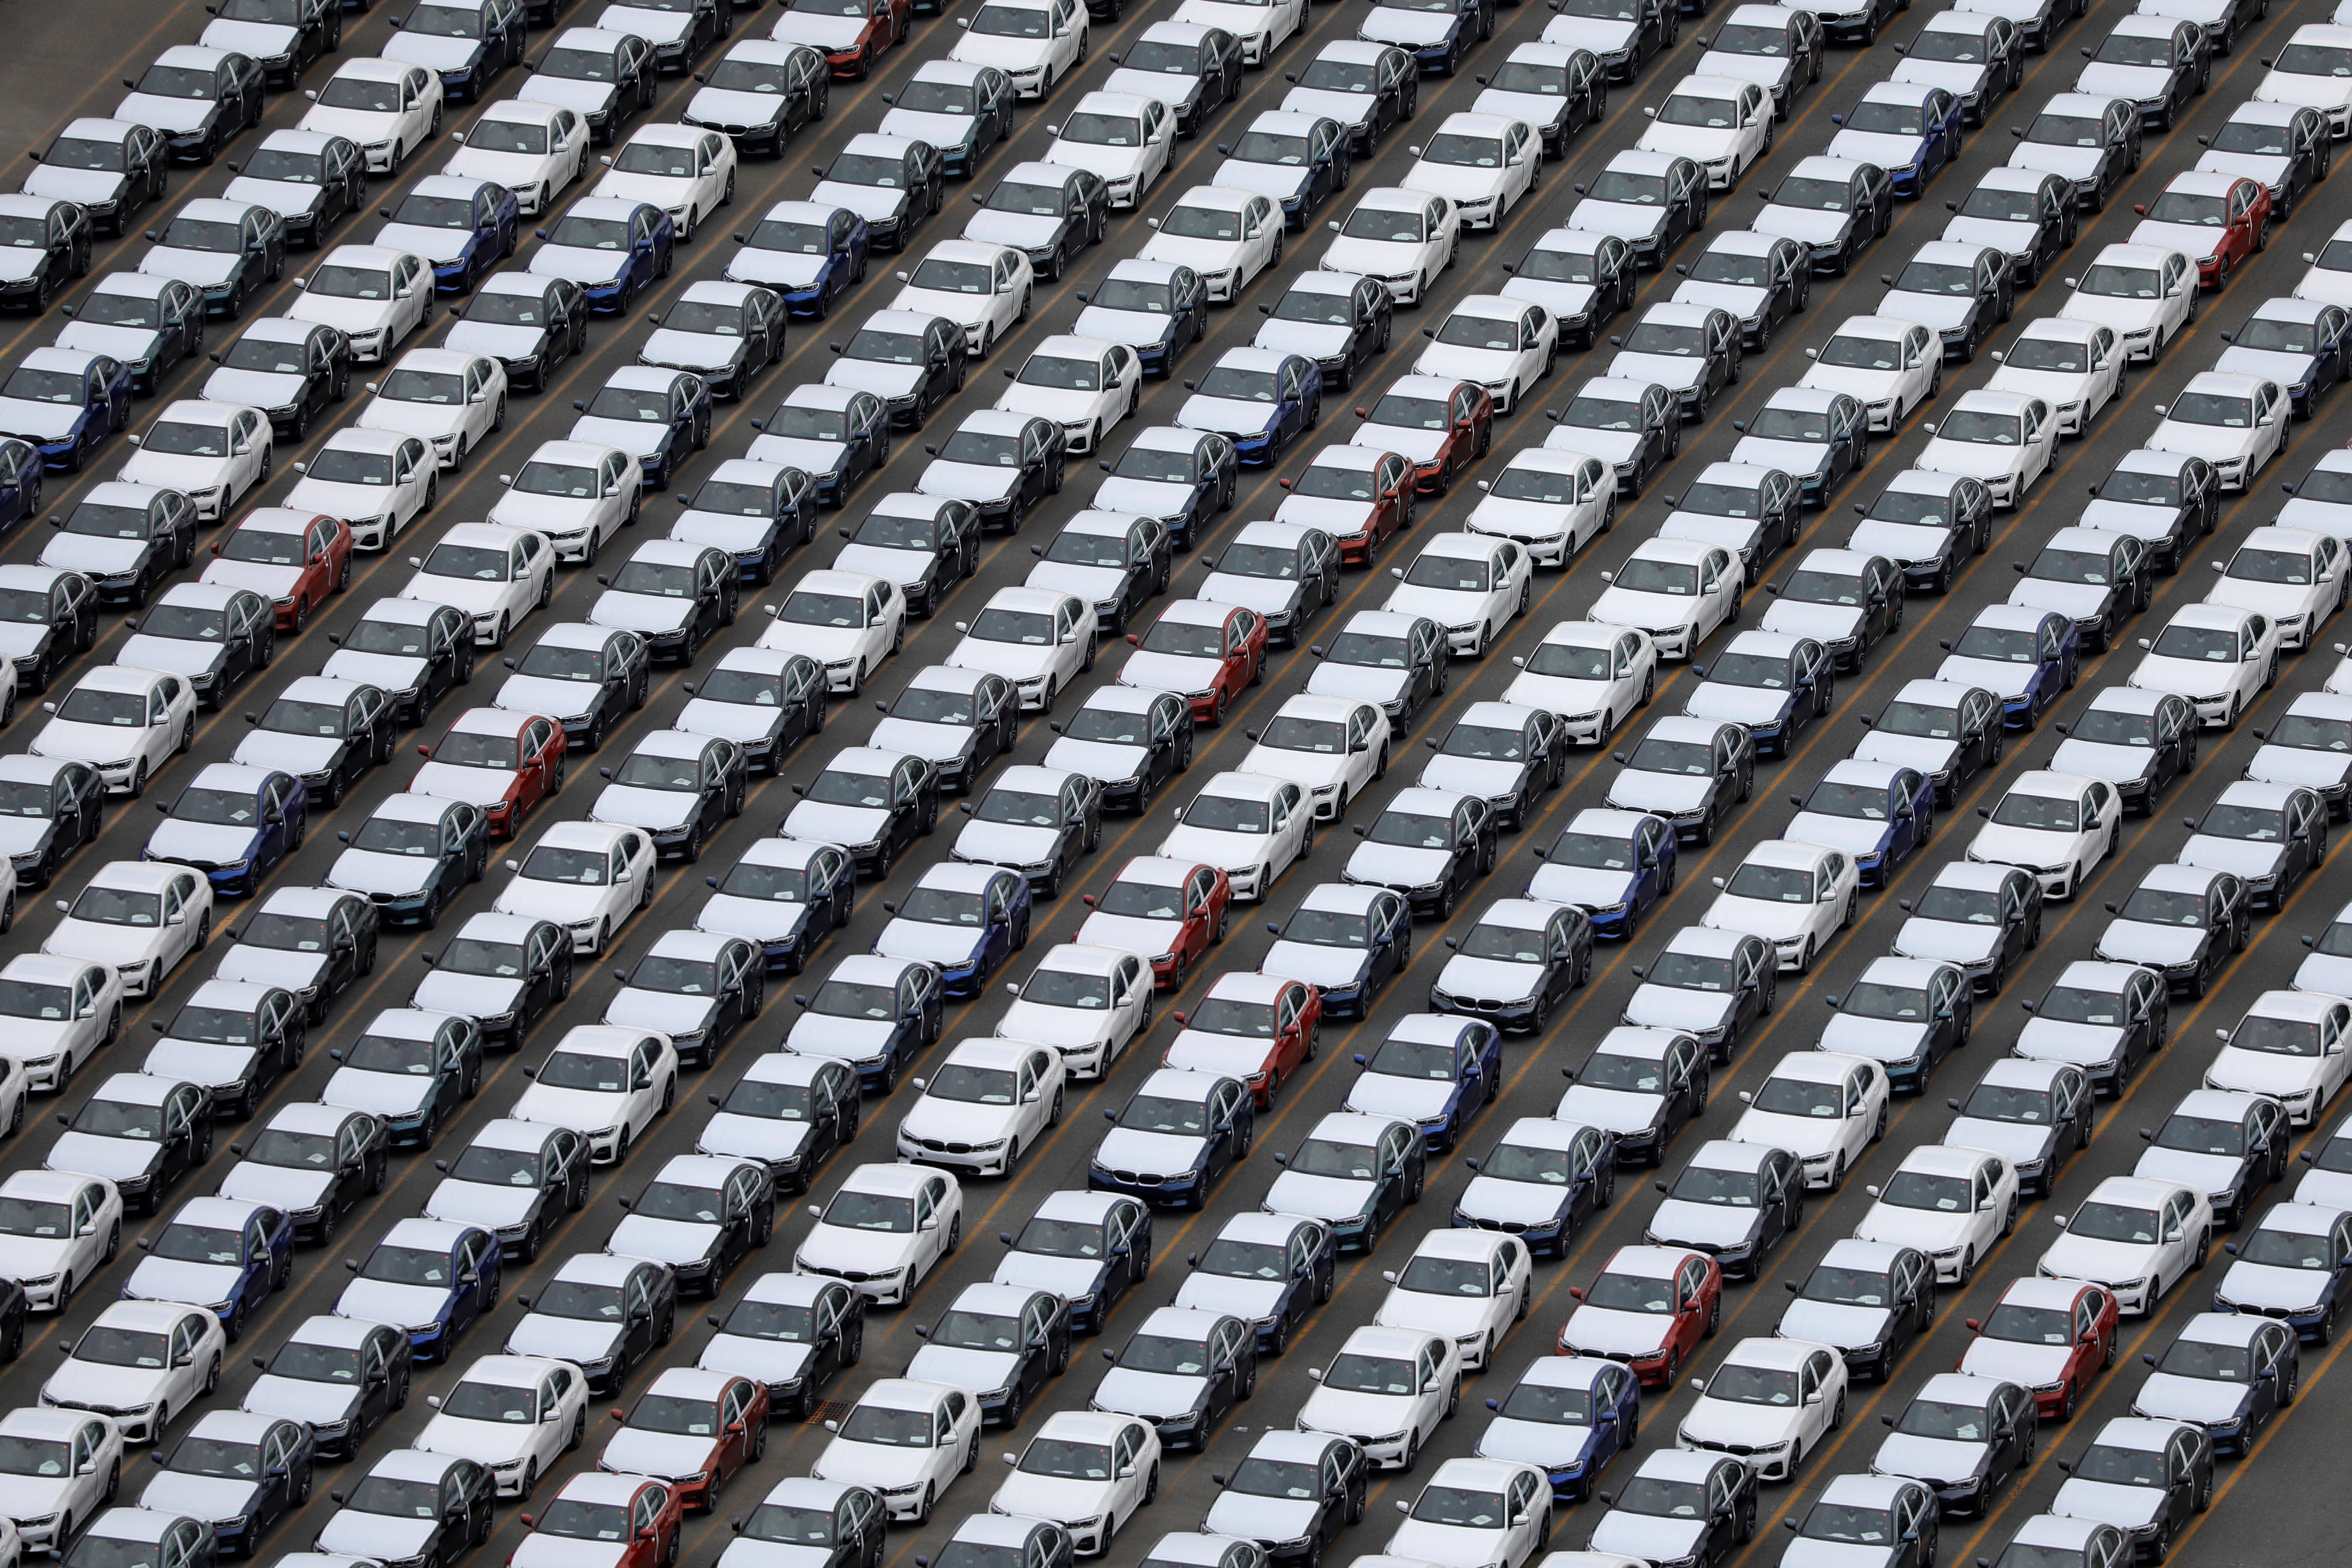 Cars are seen parked at the port in Bayonne, New Jersey